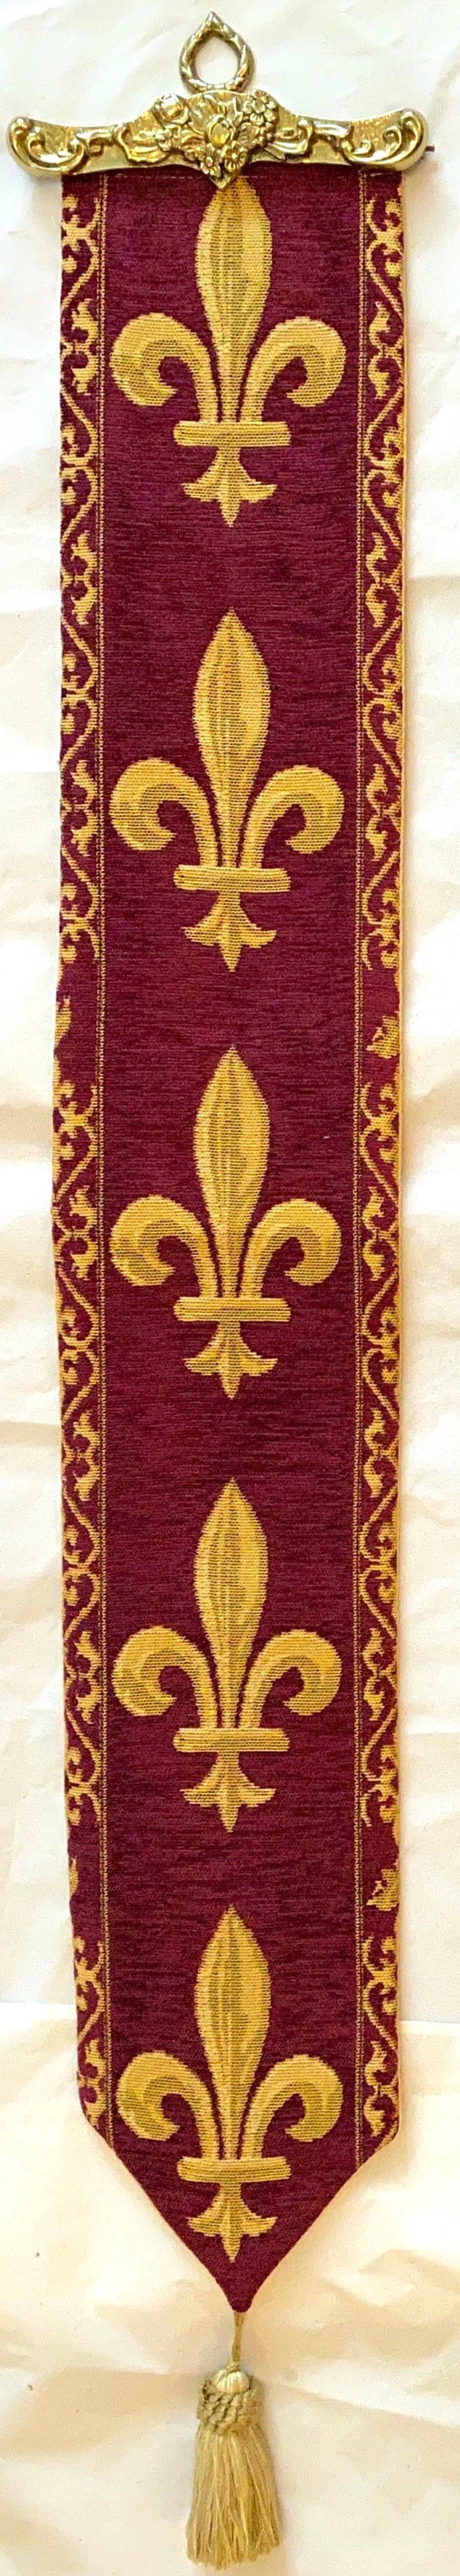 BELGIAN WOVEN Fleur de Lys fully lined TAPESTRY Bell Pull Wall Hanging with Brass Hanger and Tassel, 9300/77 Red image 6